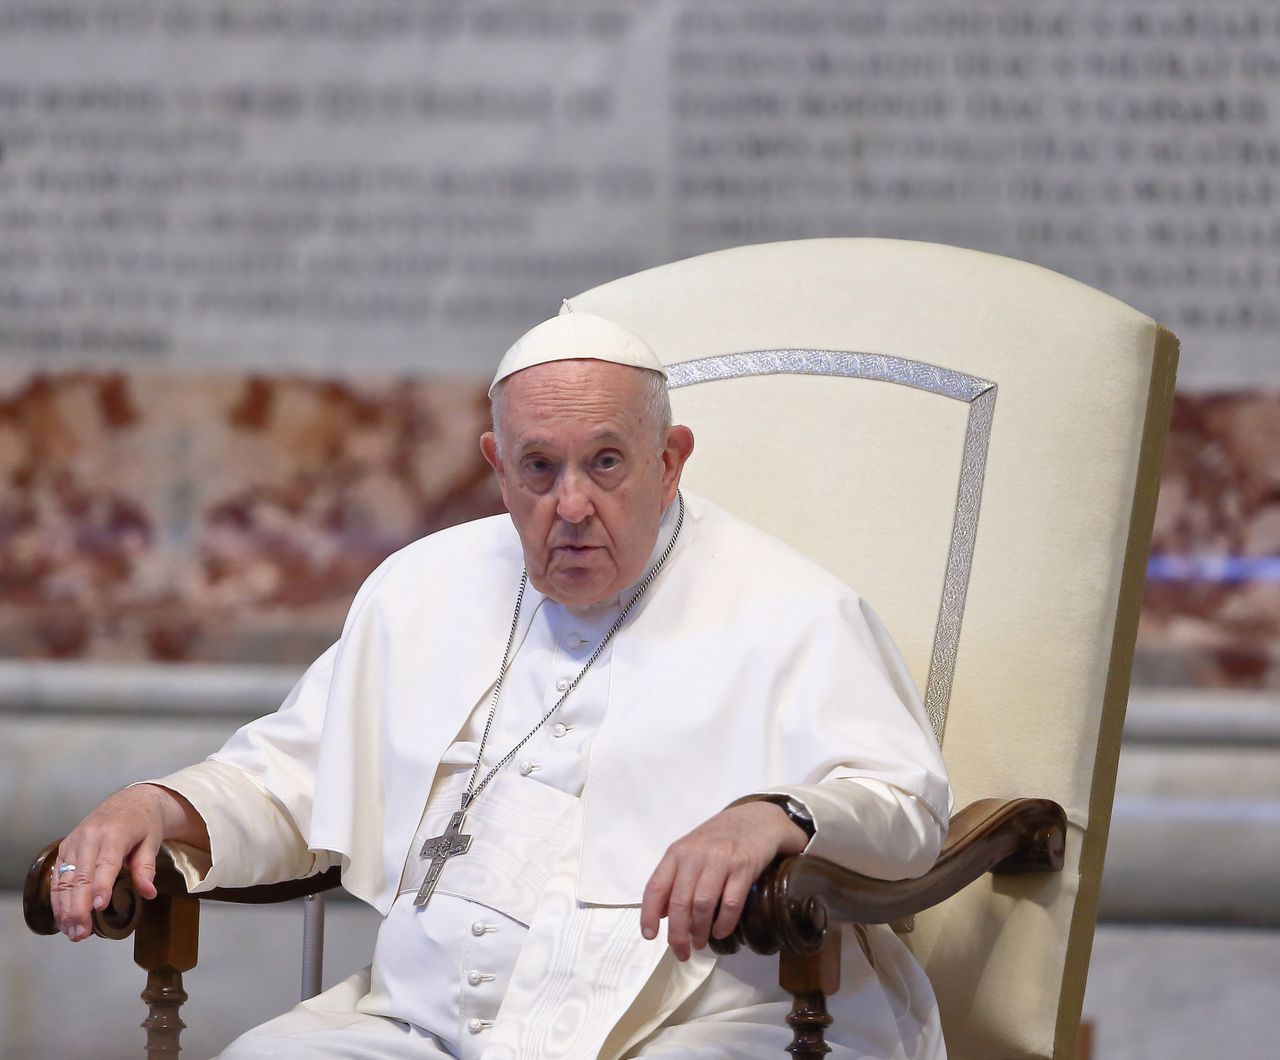 "They don't know how to smile." The Pope calls for an end to wars.